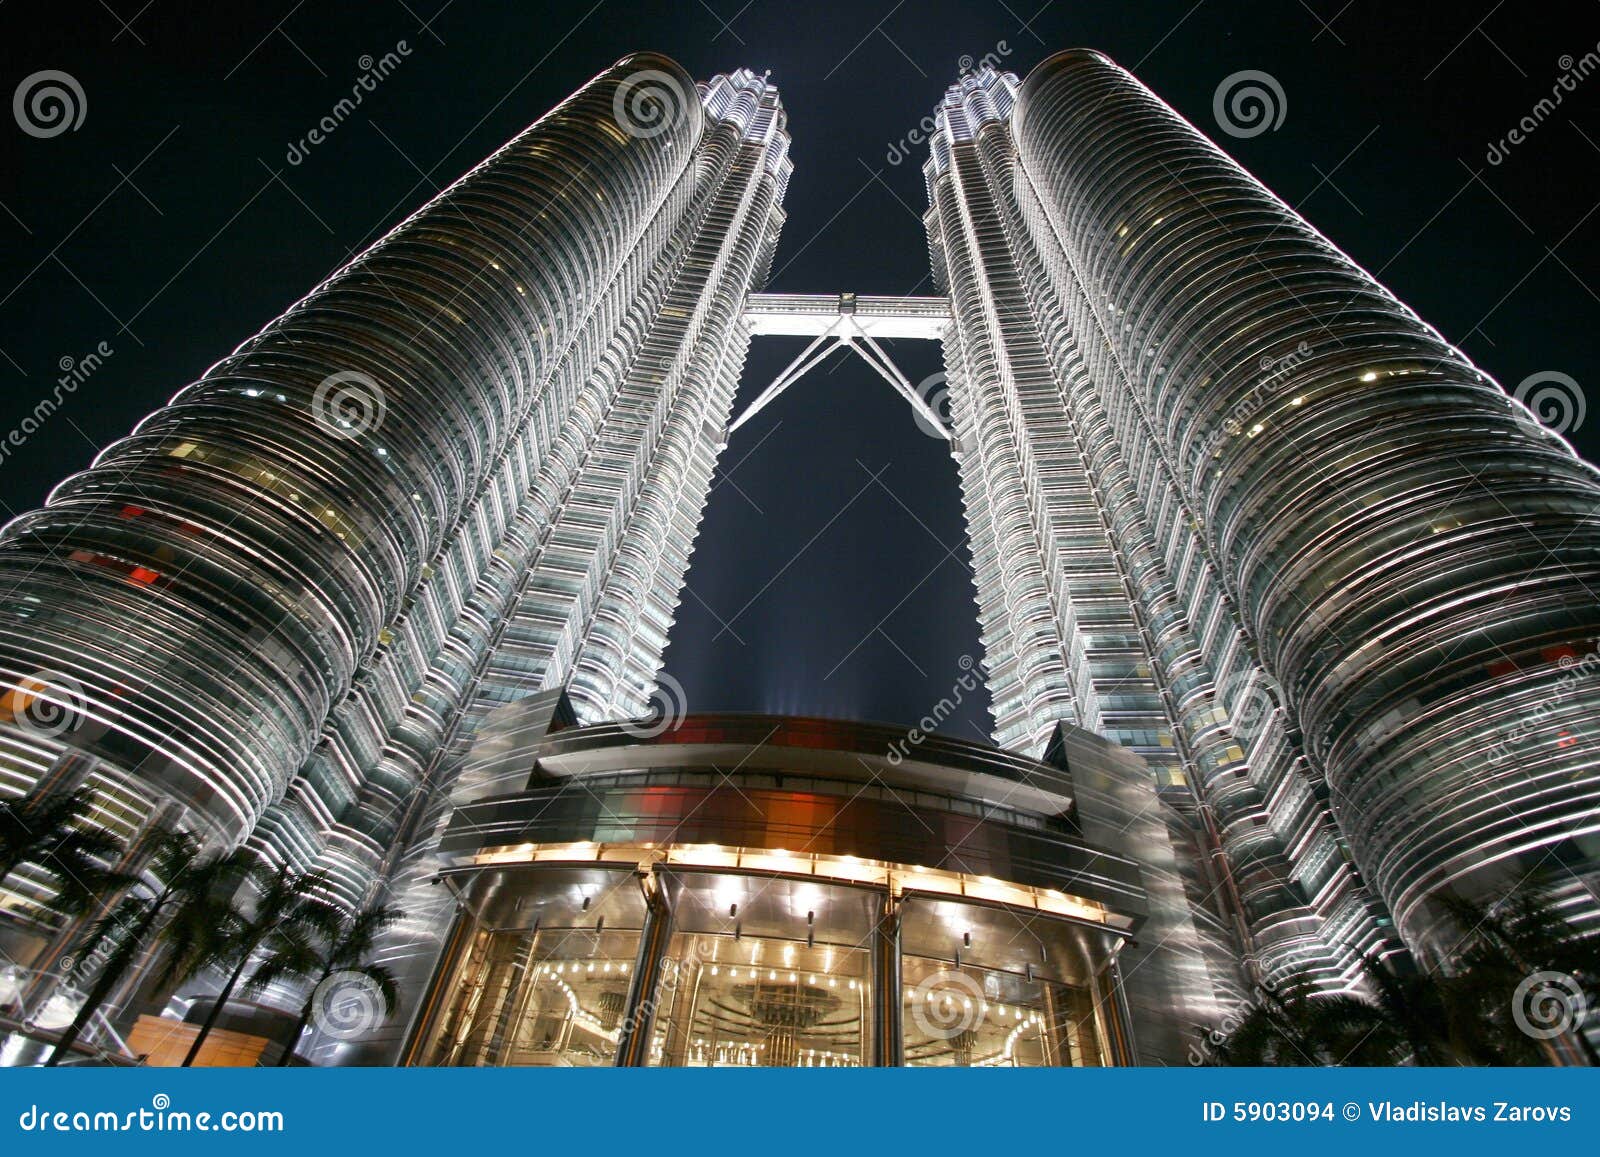 twins towers in malasia